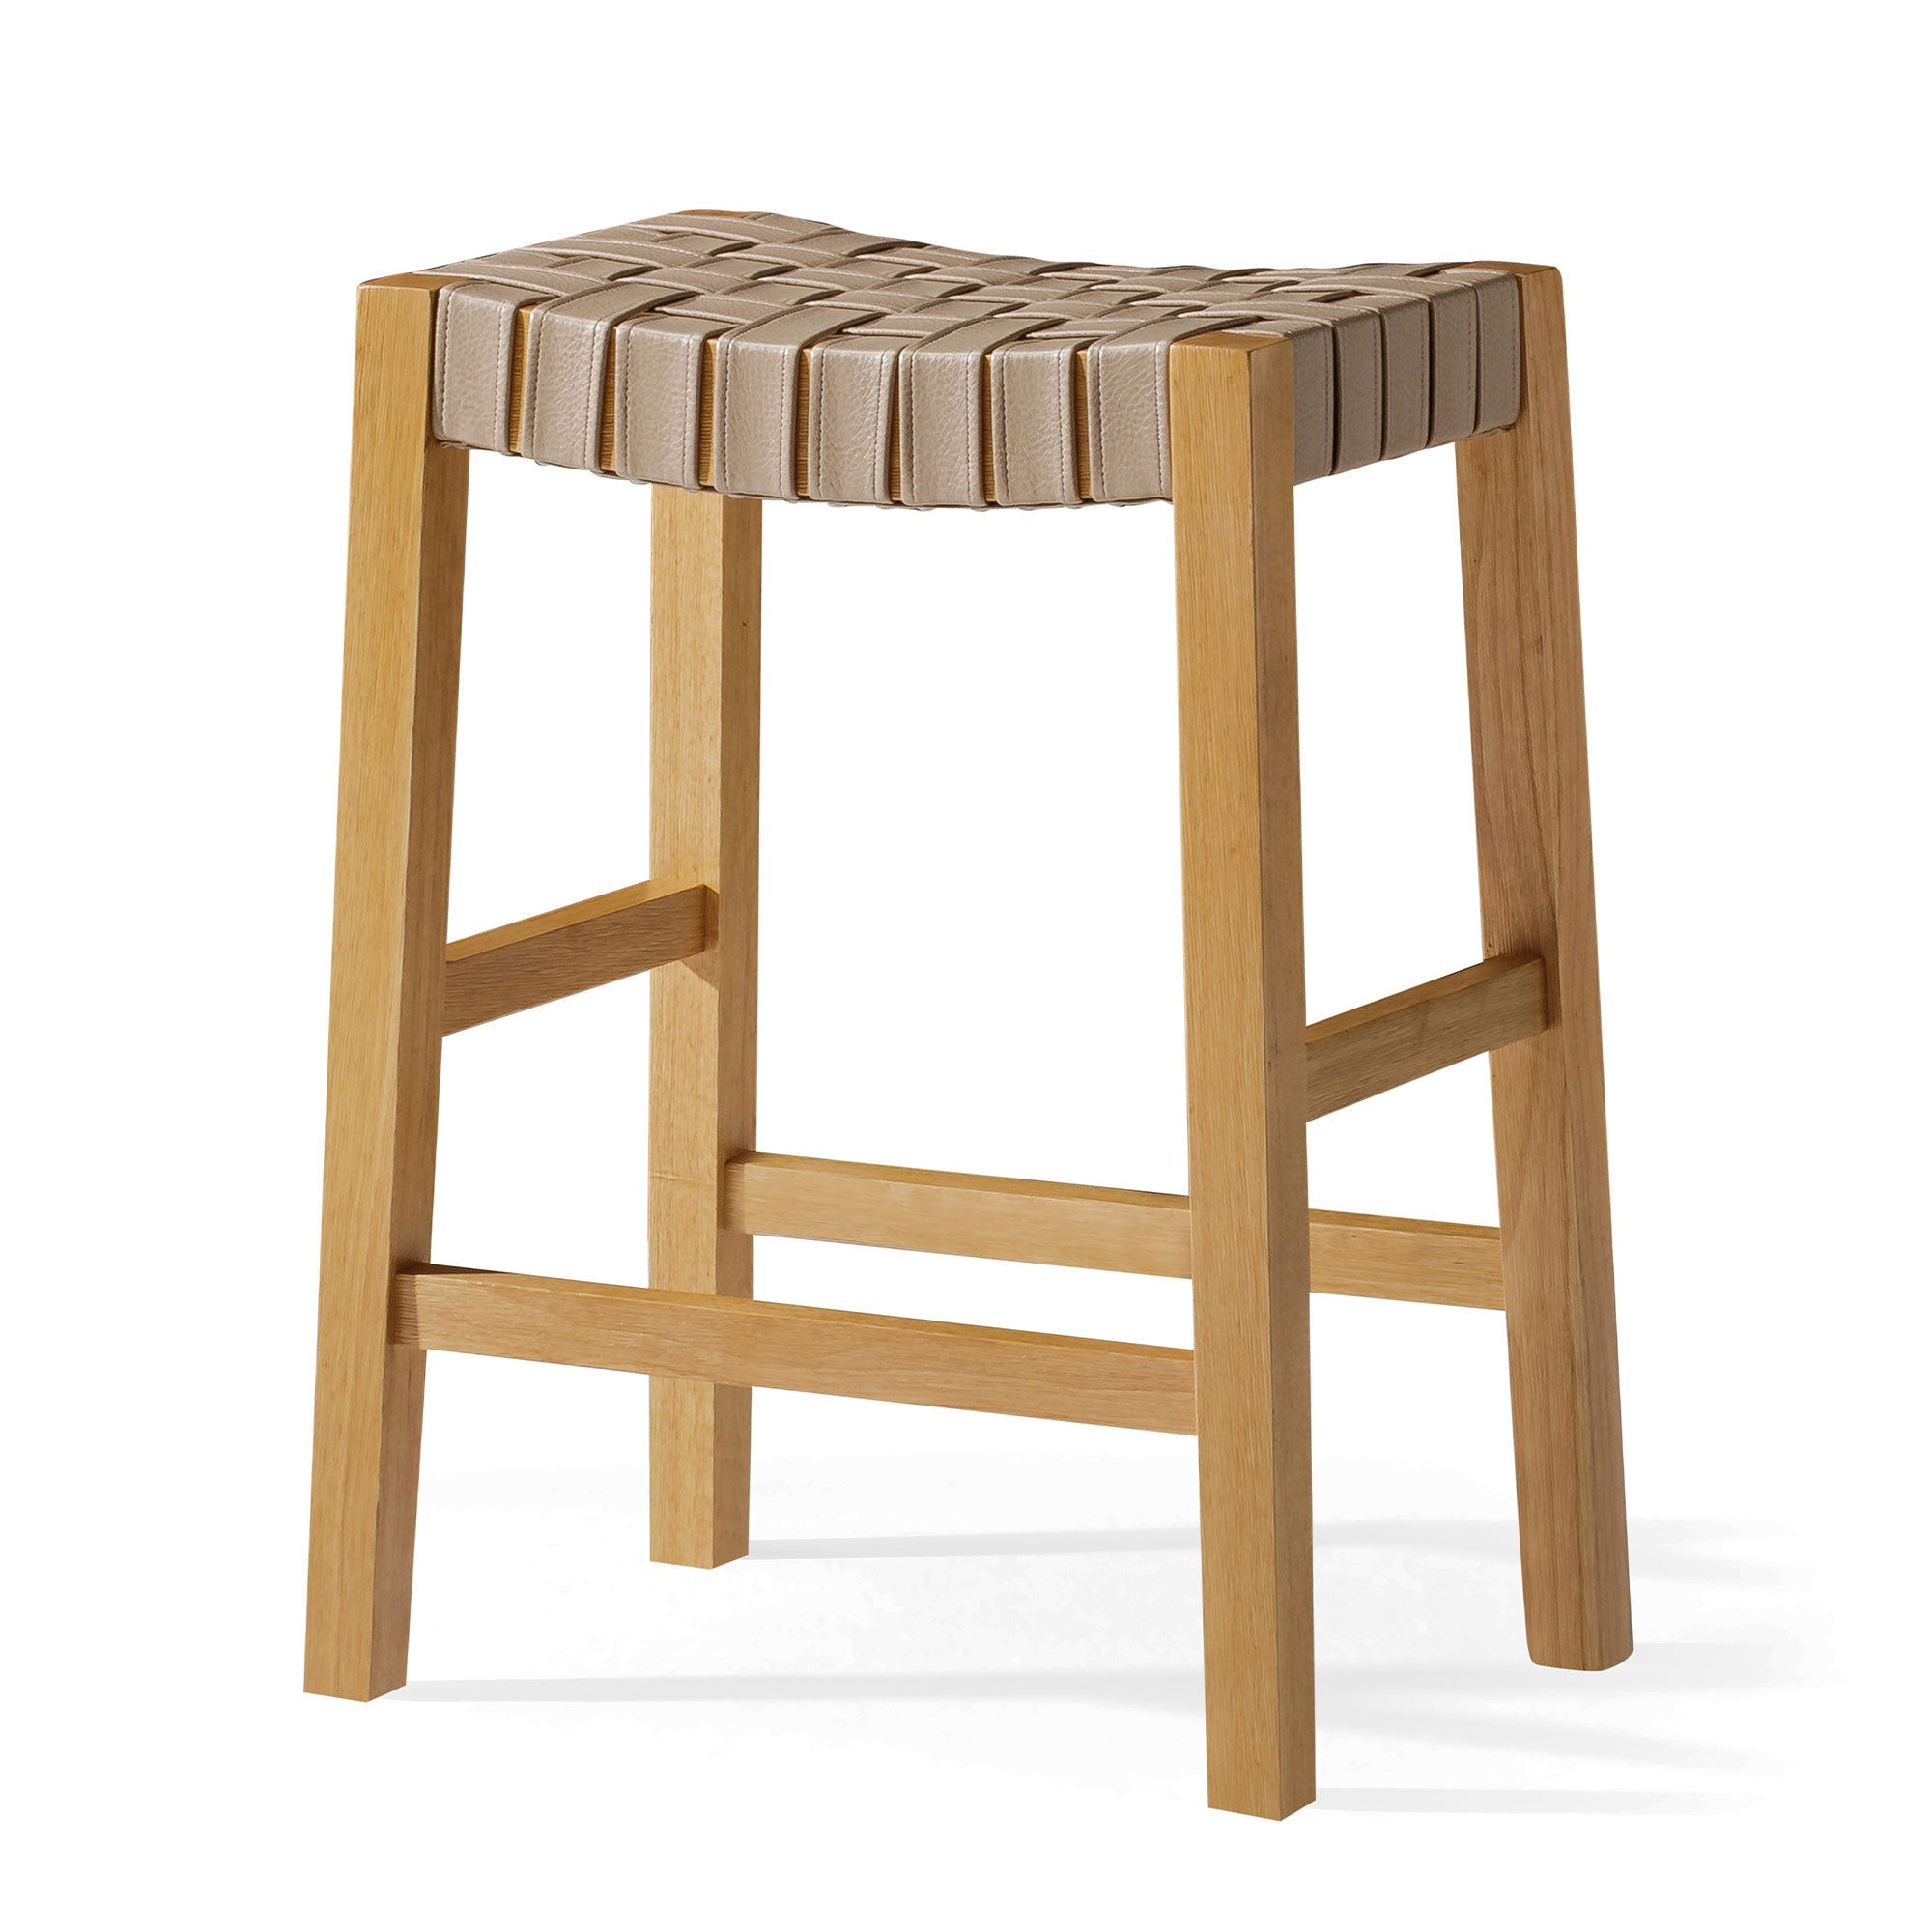 Emerson Counter Stool in Weathered Natural Wood Finish with Avanti Bone Vegan Leather